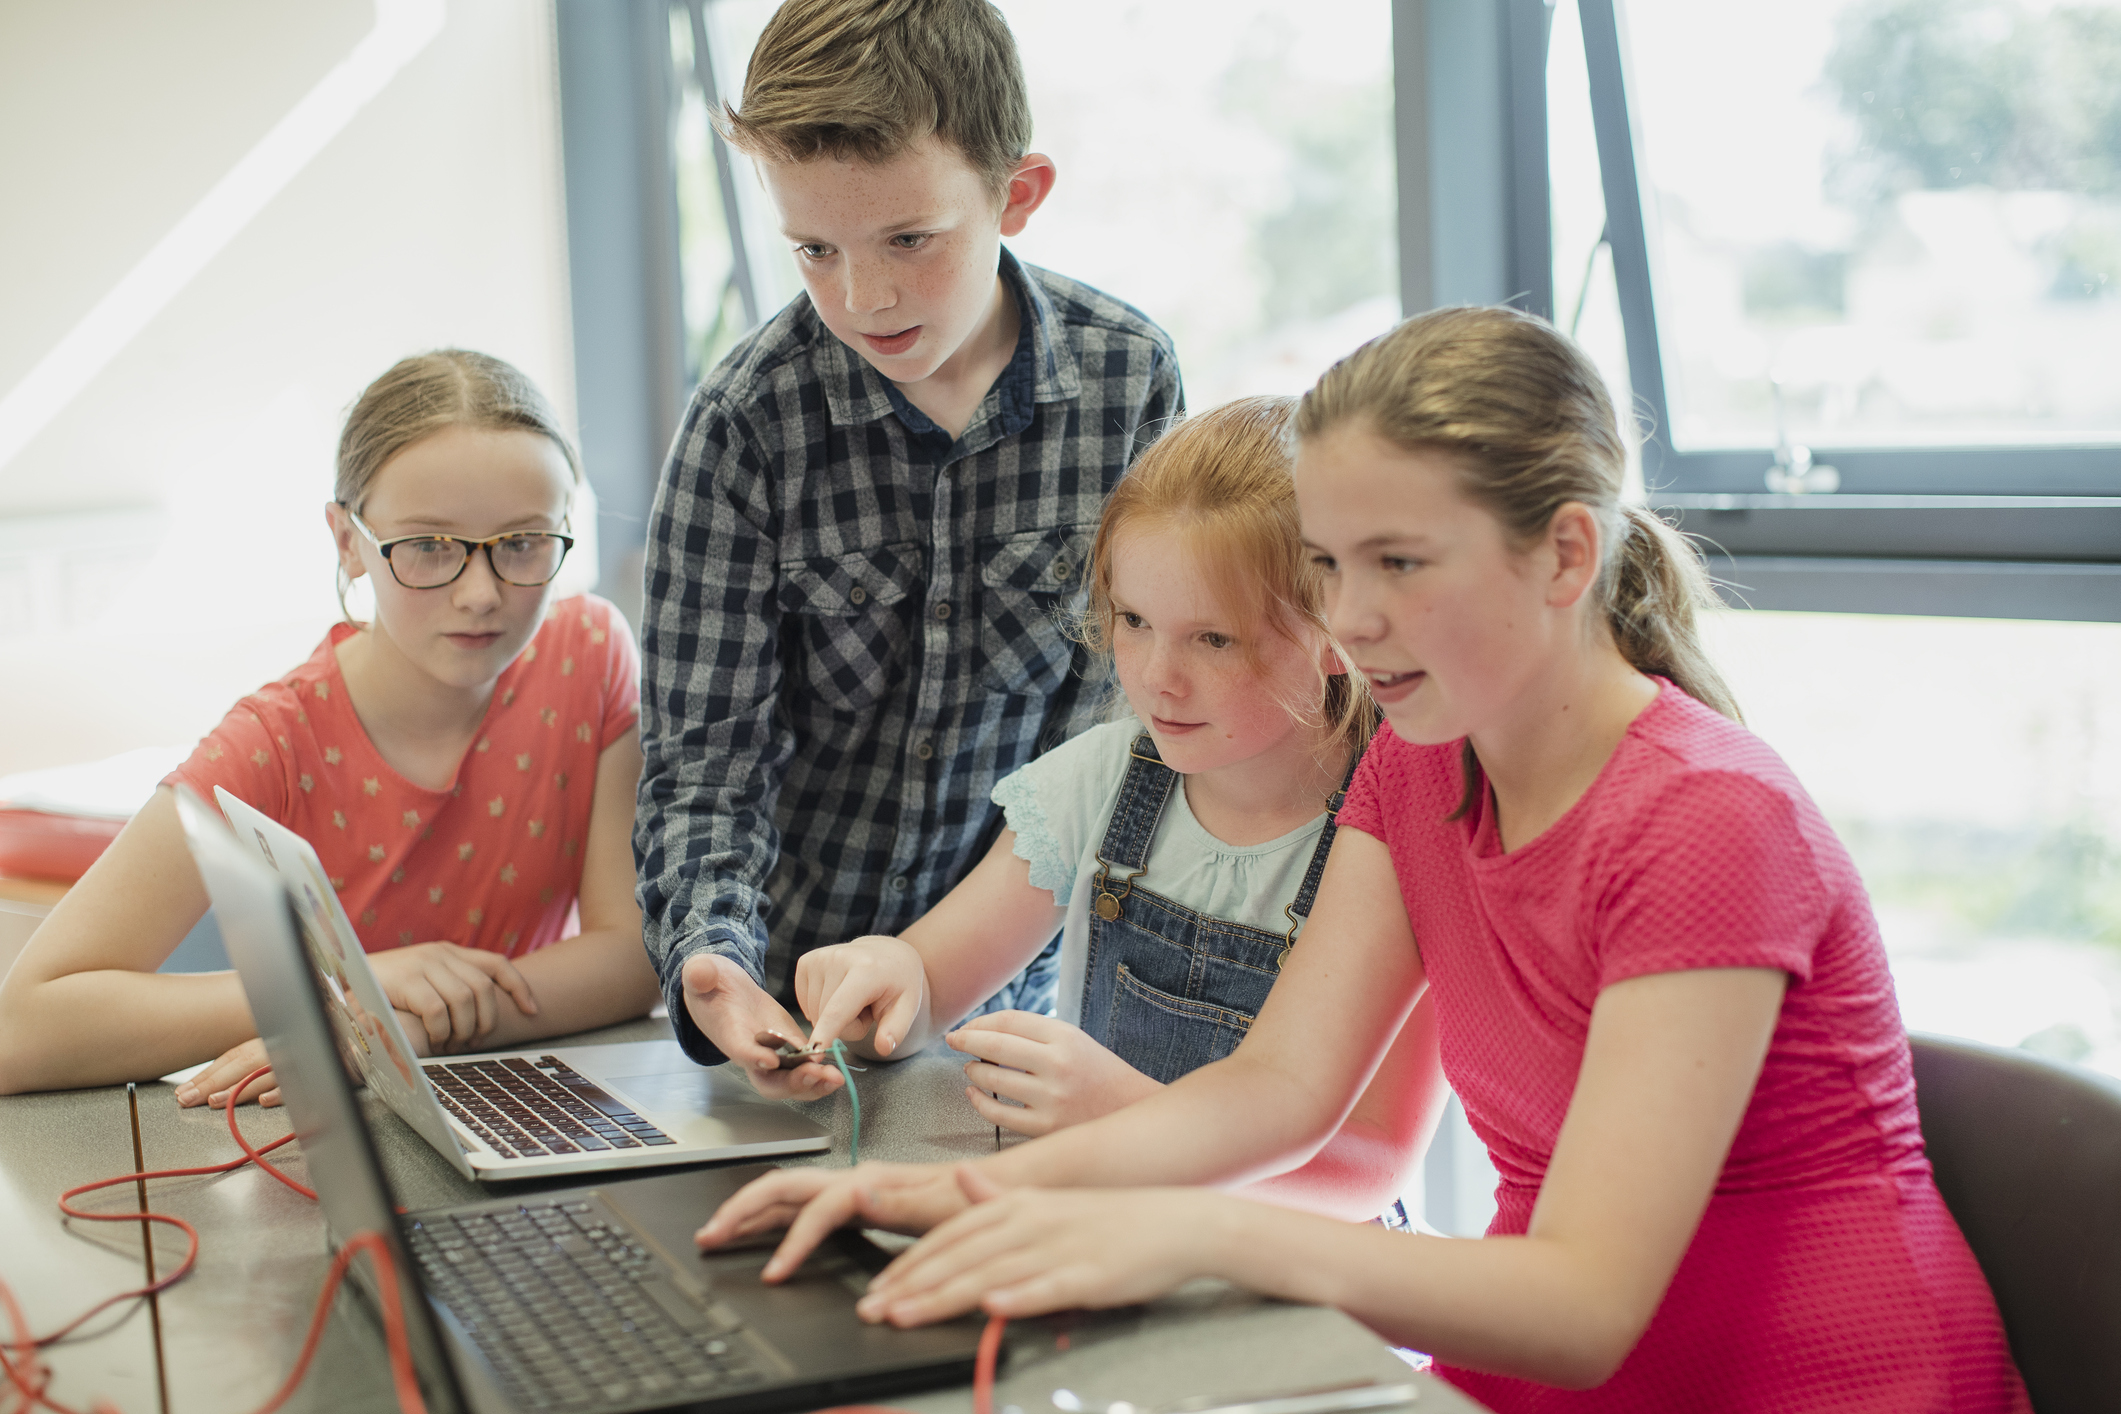 Top 5 Myths About Kids Coding Exposed